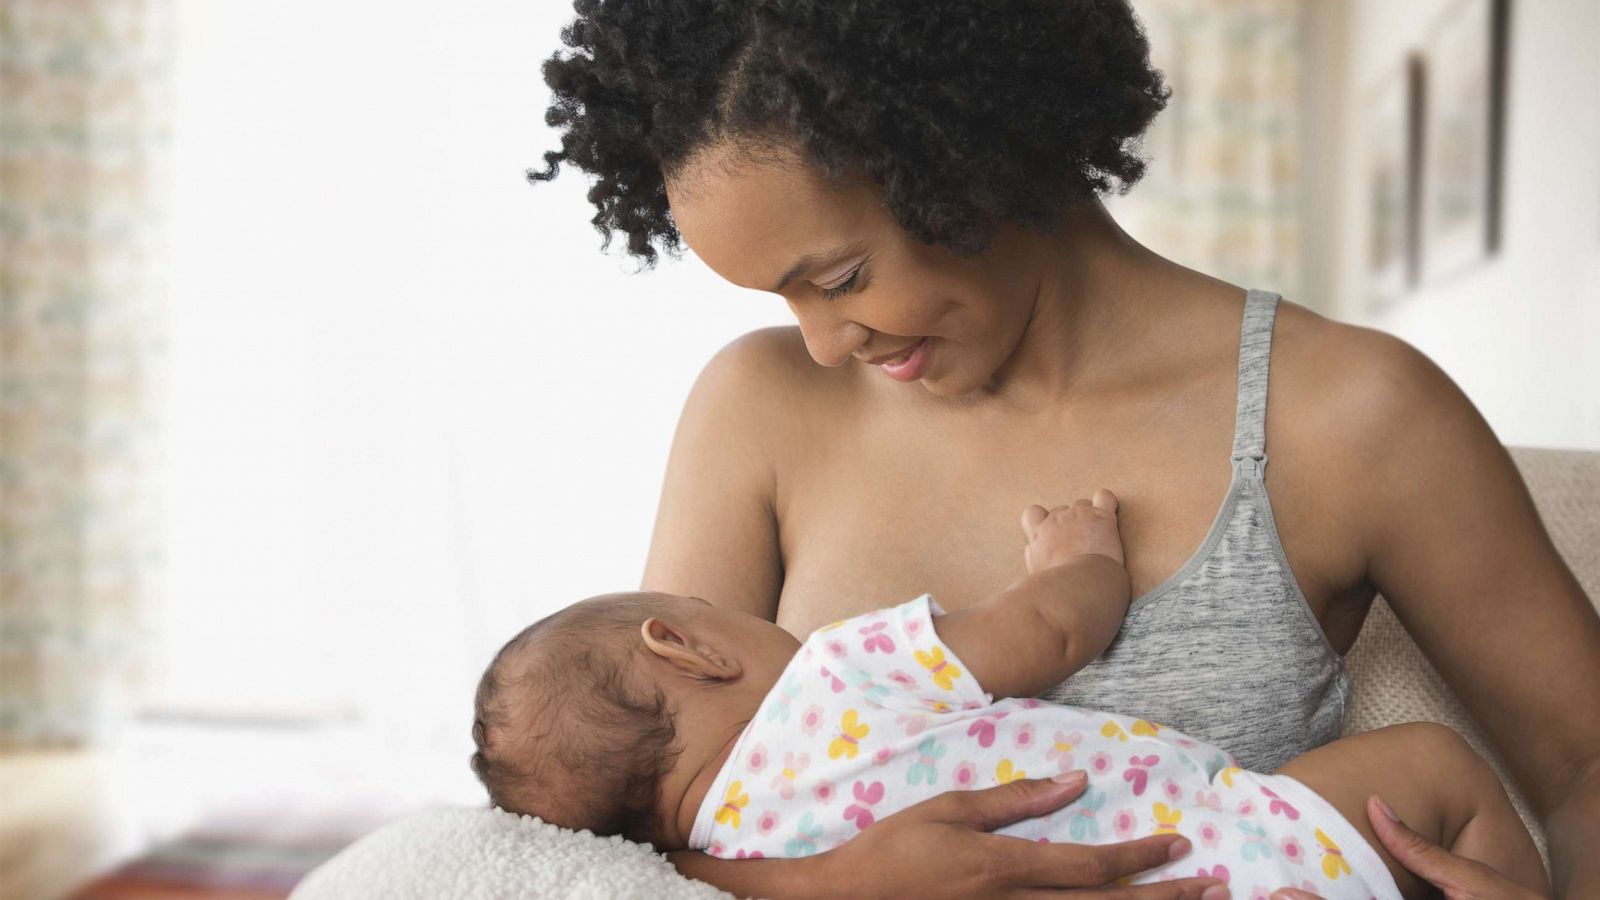 Jamaican Breastfeeding Porn - Breastfeeding basics: All of your questions answered - Good Morning America